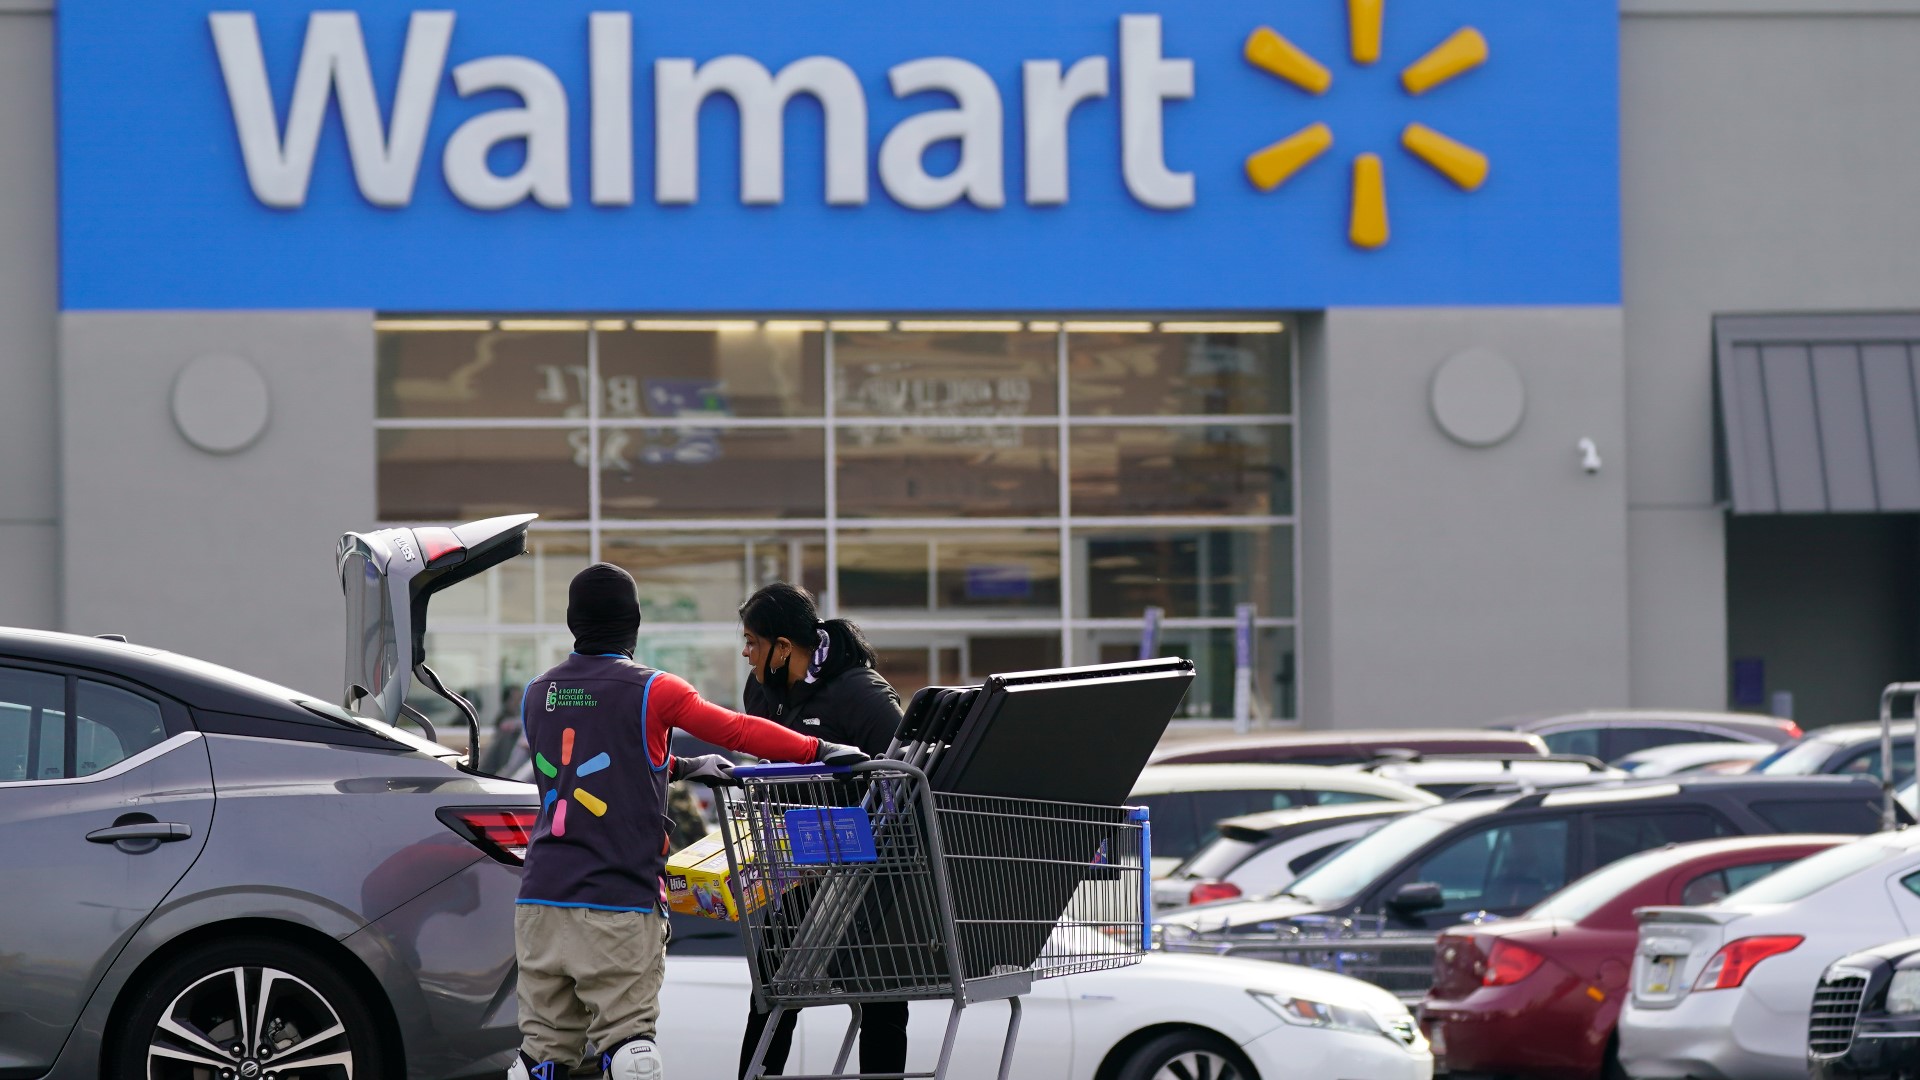 Walmart has unveiled its 2022 top toy list to help plan ahead for the holiday season.